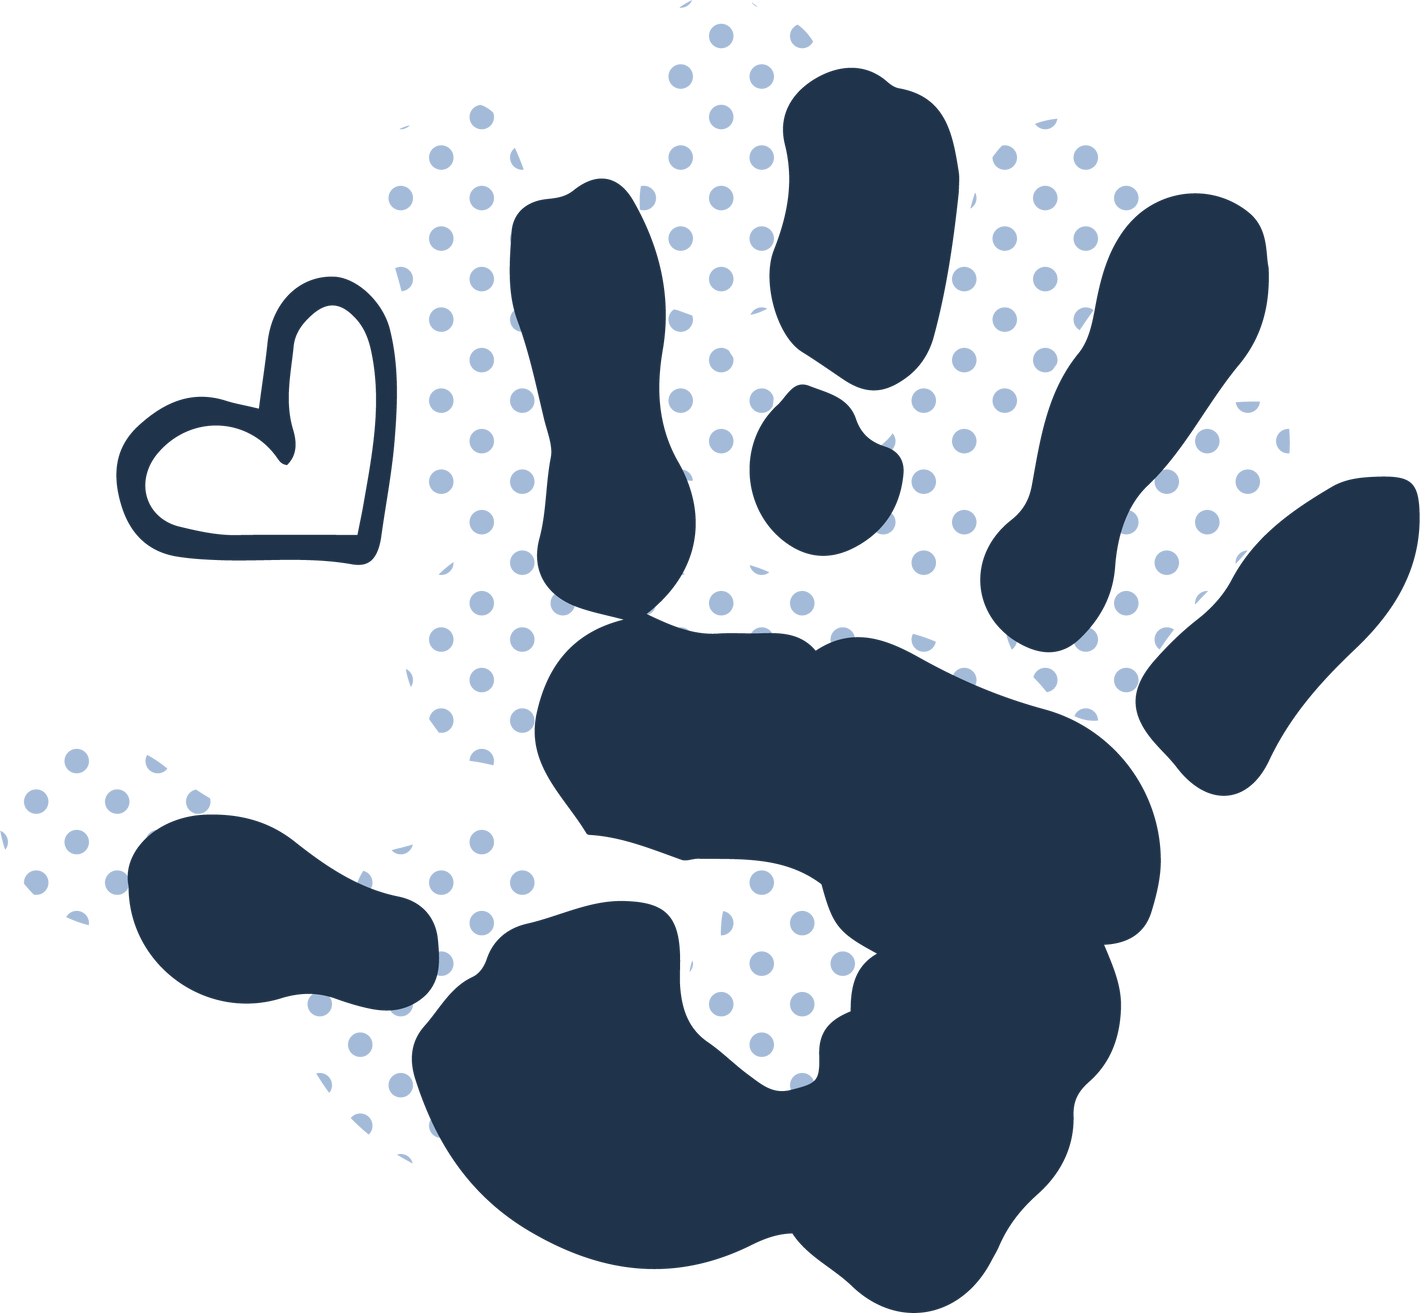 Image of illustrated hand and heart for Petite Maison Play representing connect